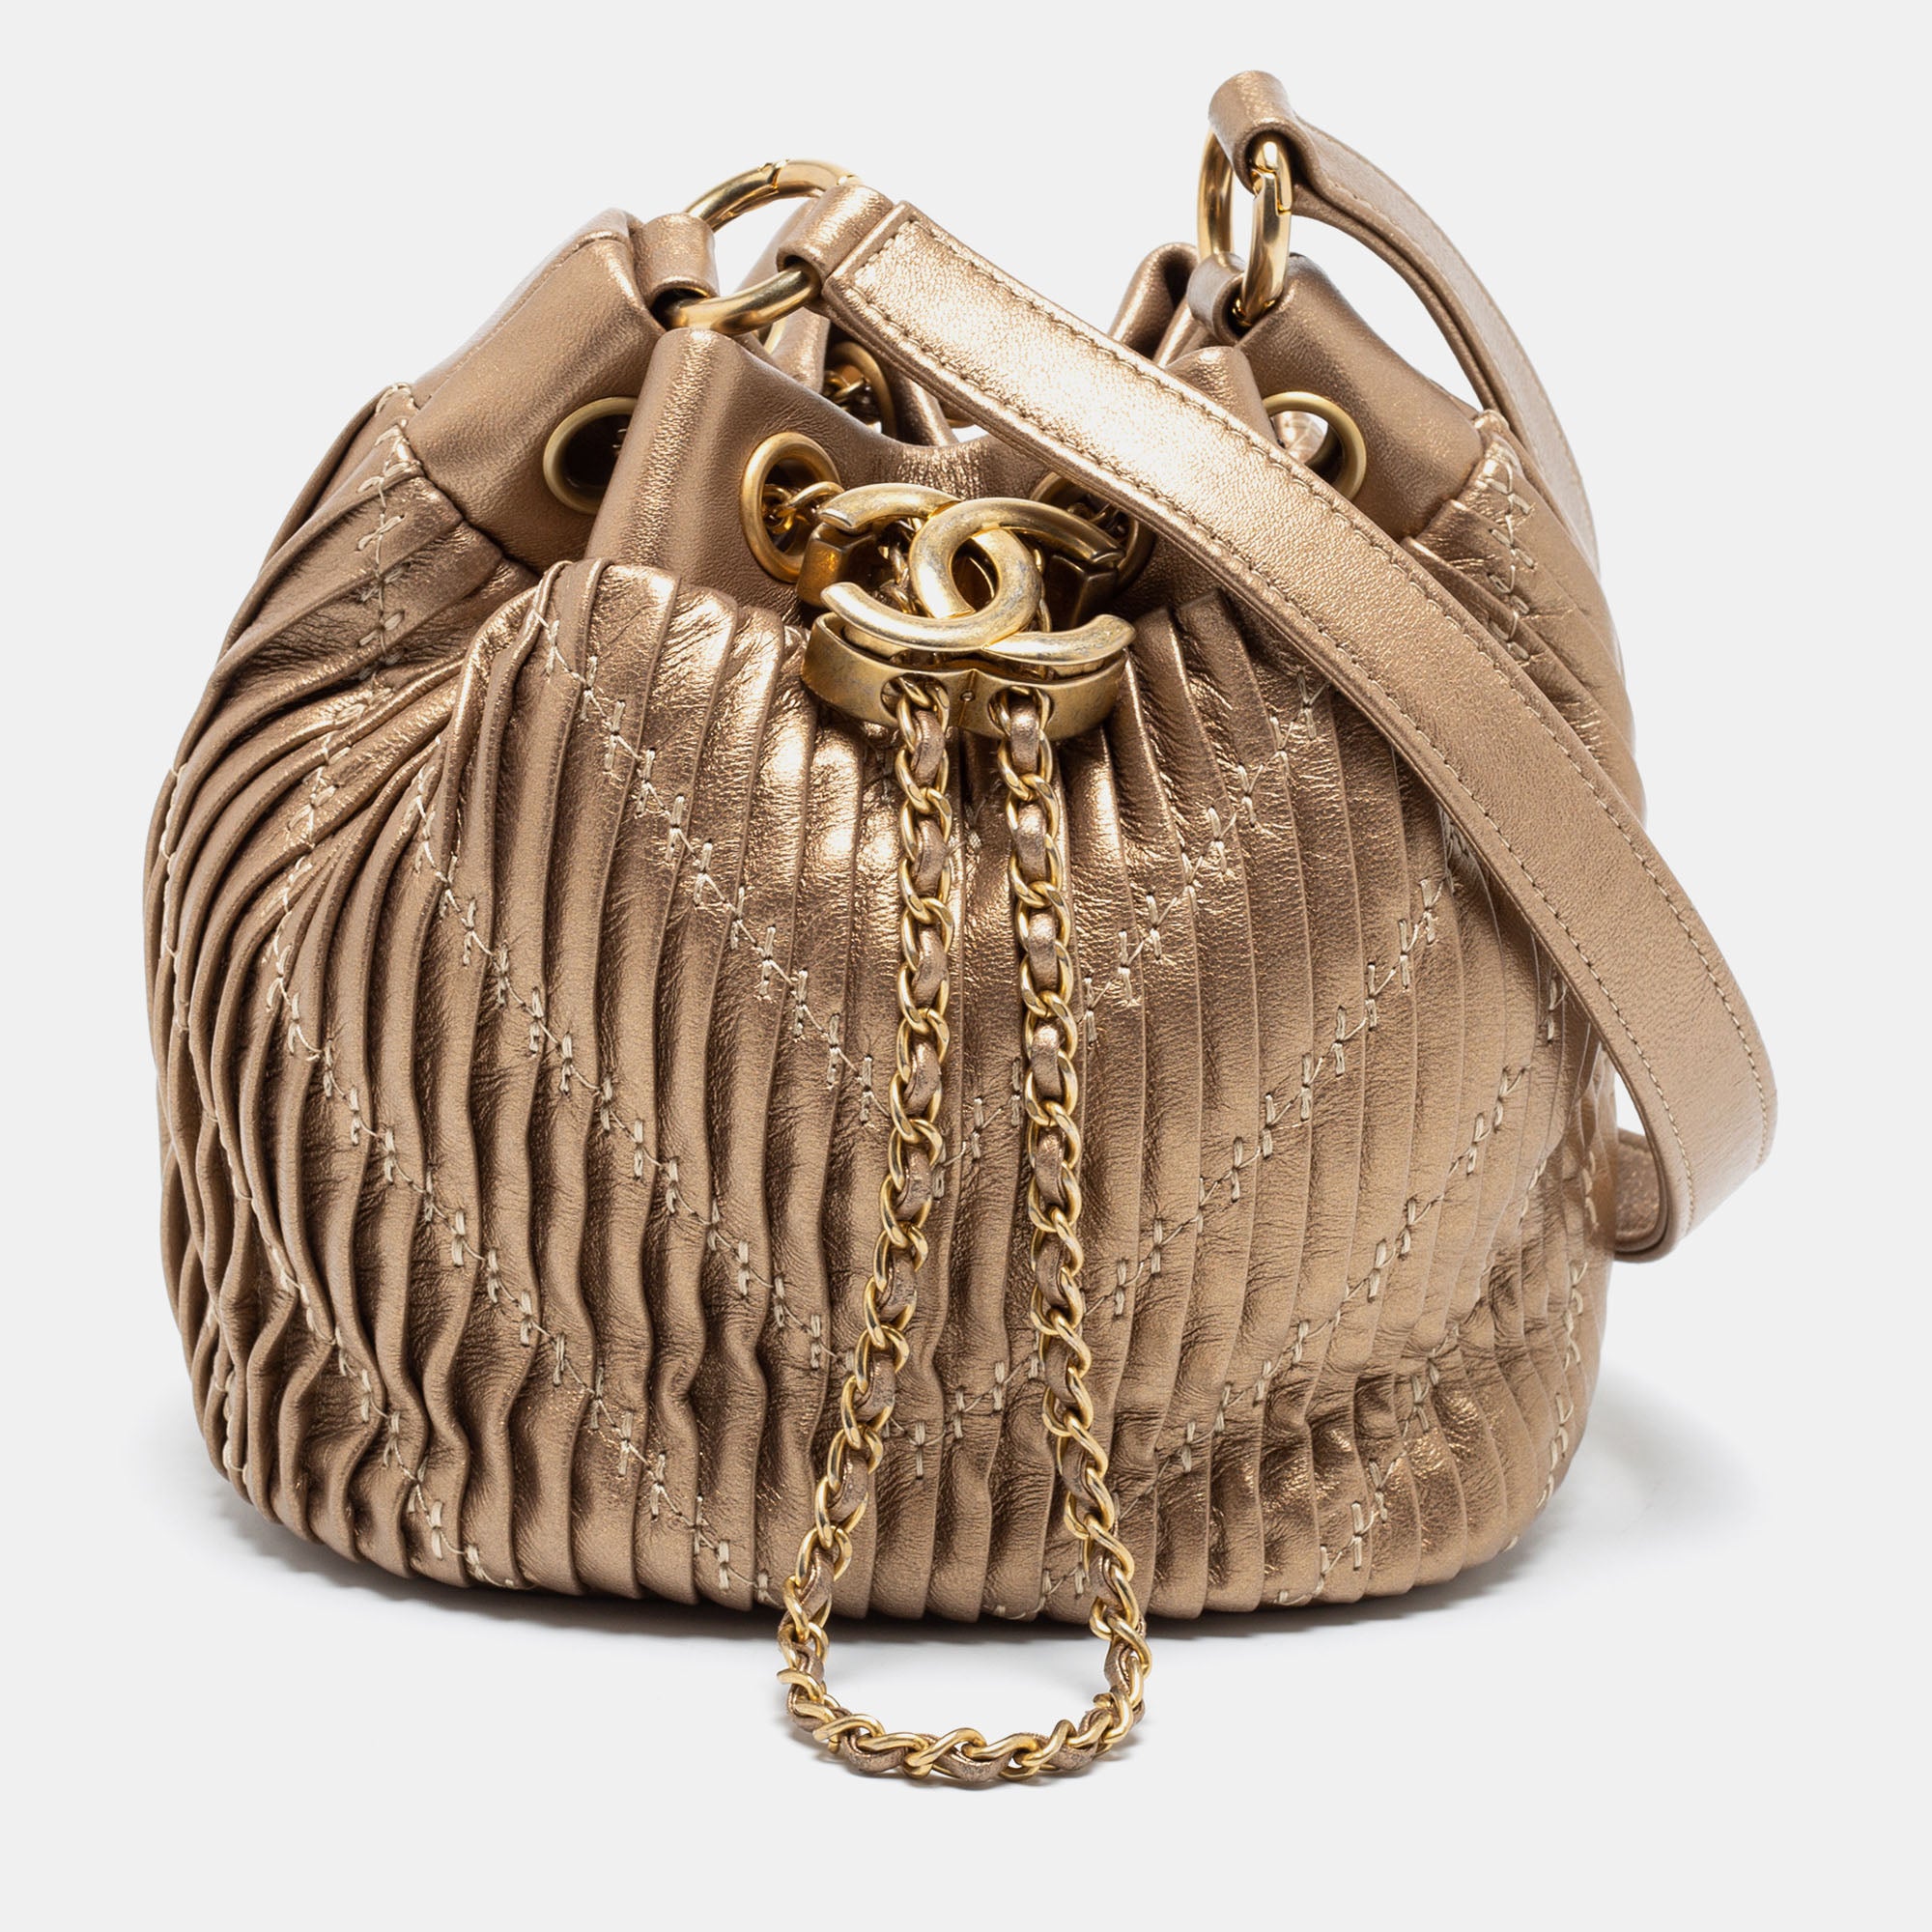 Chanel Gold Leather Small Coco Pleats Drawstring Bucket Bag